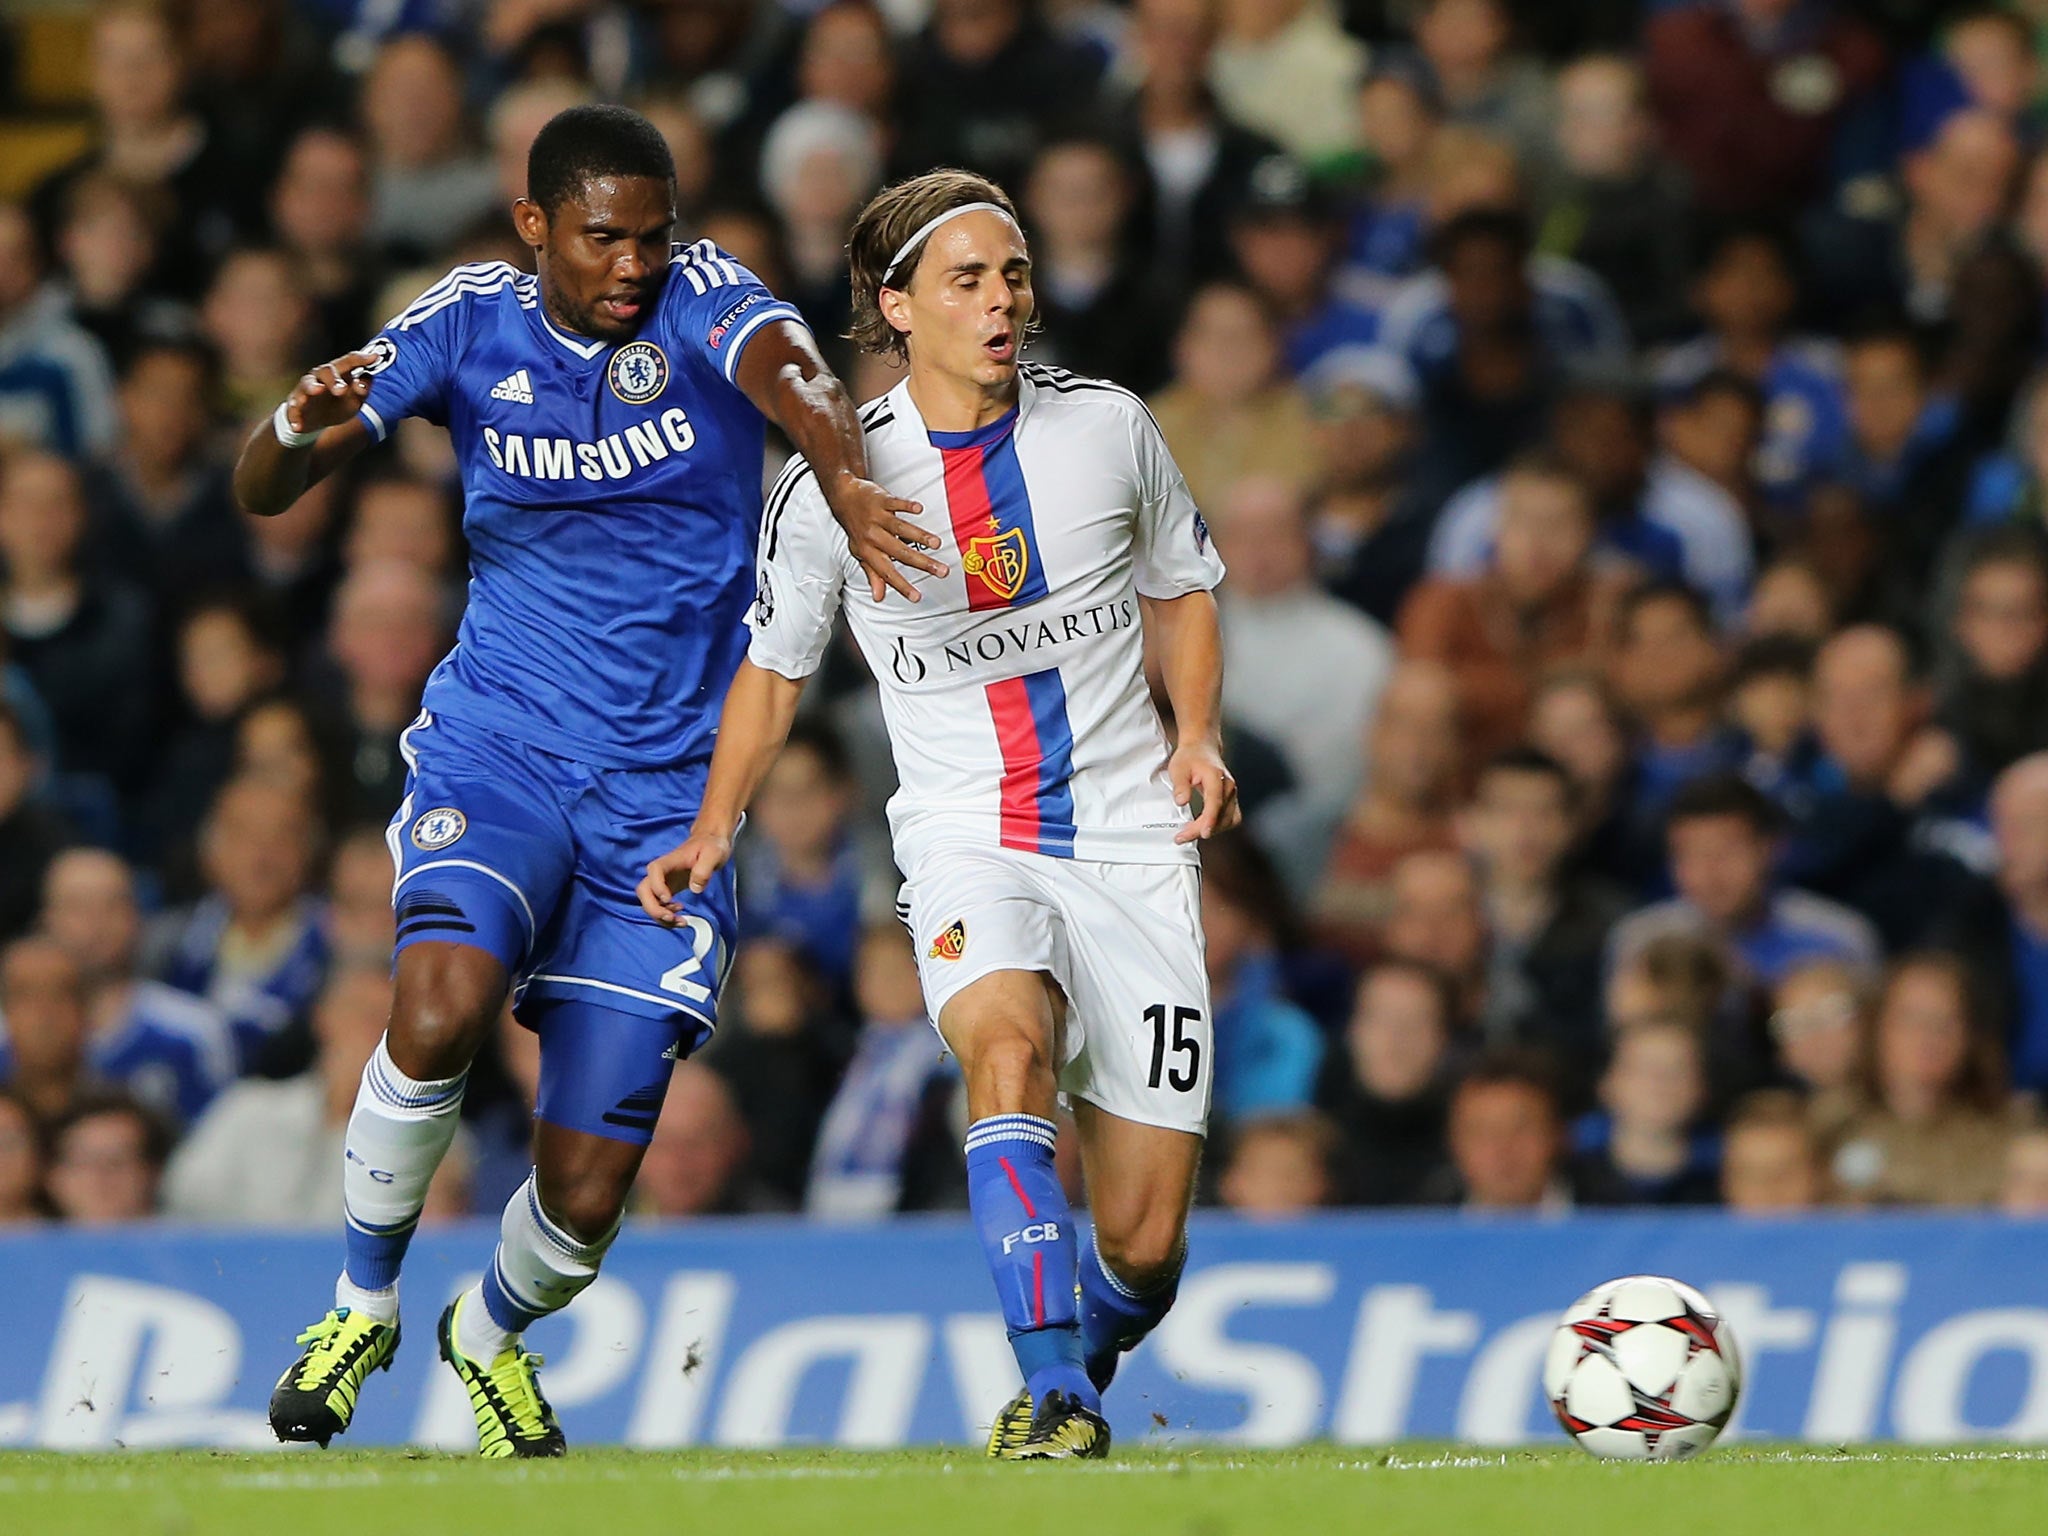 Samuel Eto'o in action for Chelsea in the Champions League